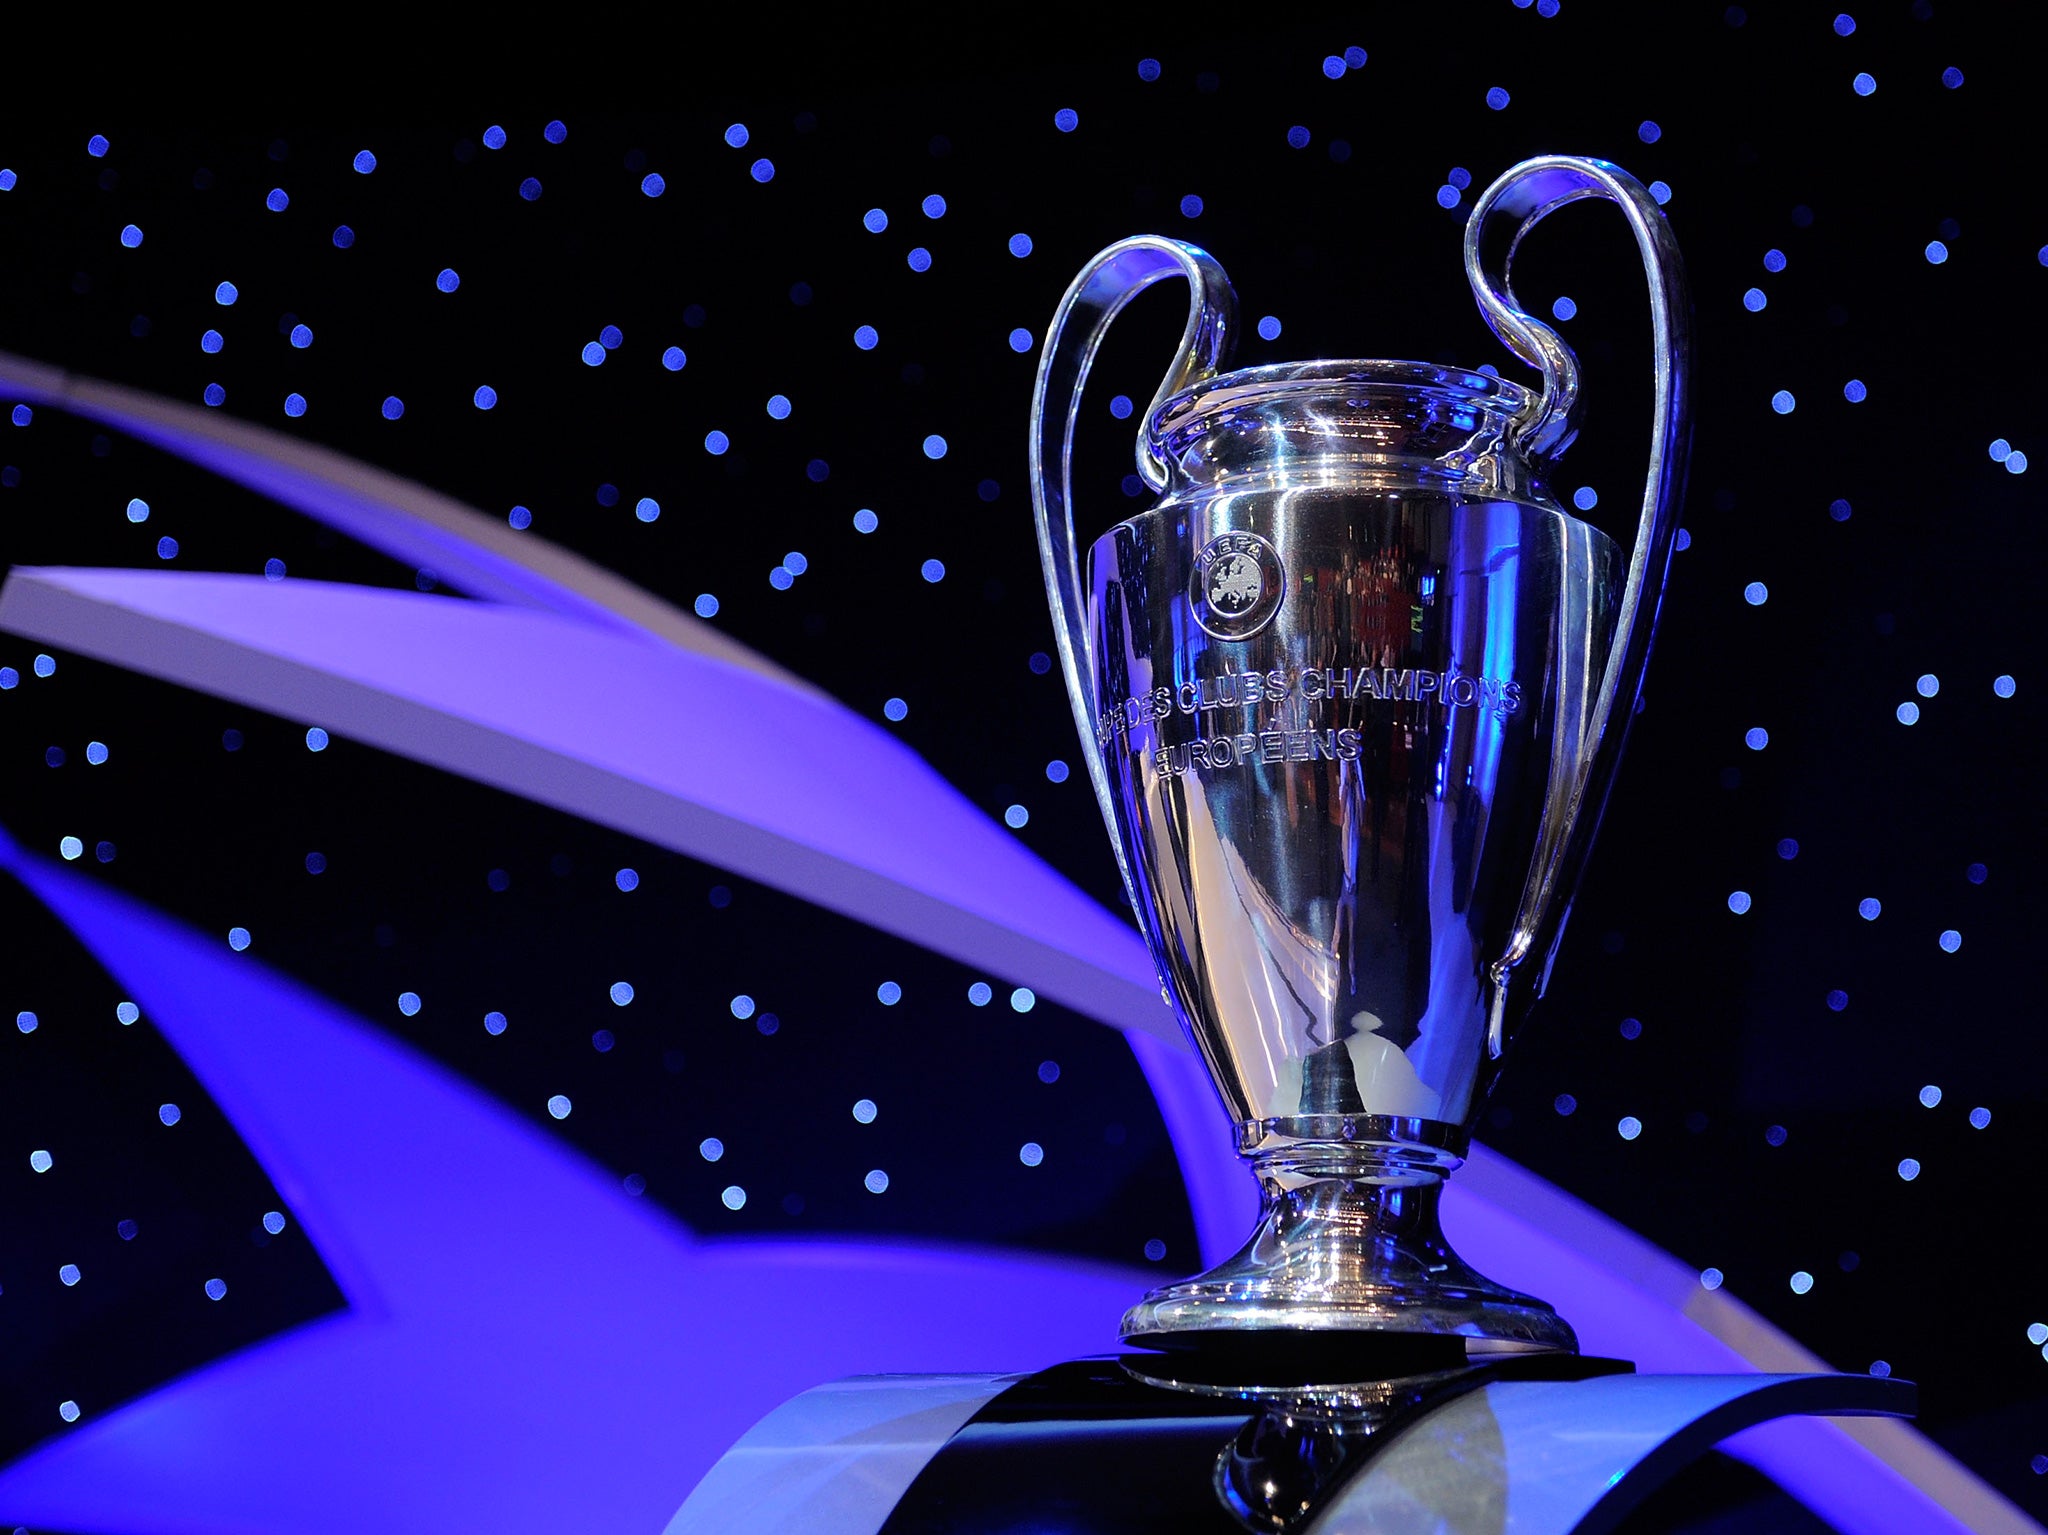 The Champions League trophy was lifted by Real Madrid last season